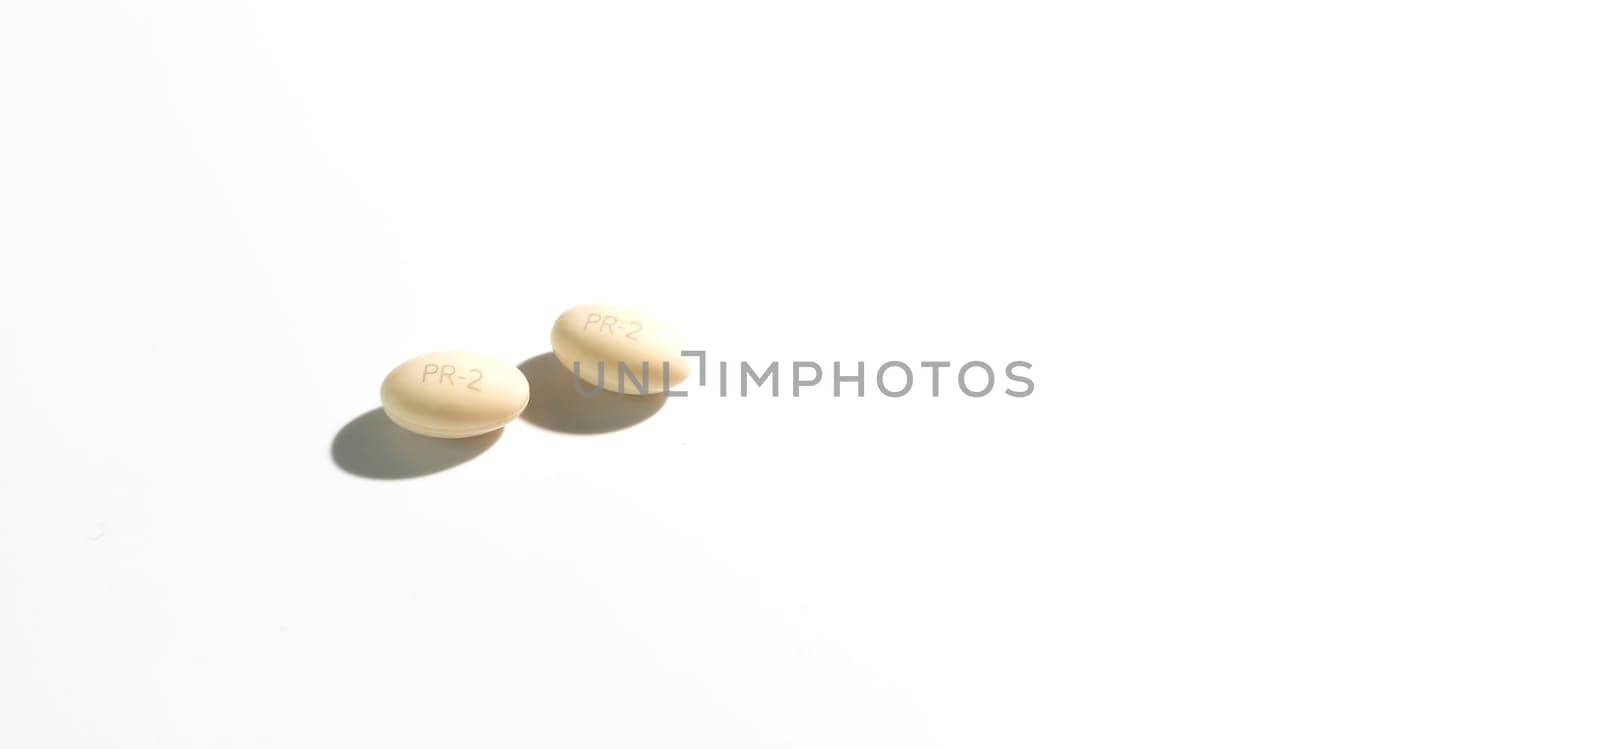 Banner Isolated Progesterone Pill, Capsule During Pregnancy On White Background. Dose Of Medications treats irregular menstrual cycle, prevents thicknessing the lining of uterus, Horizontal Copyspace